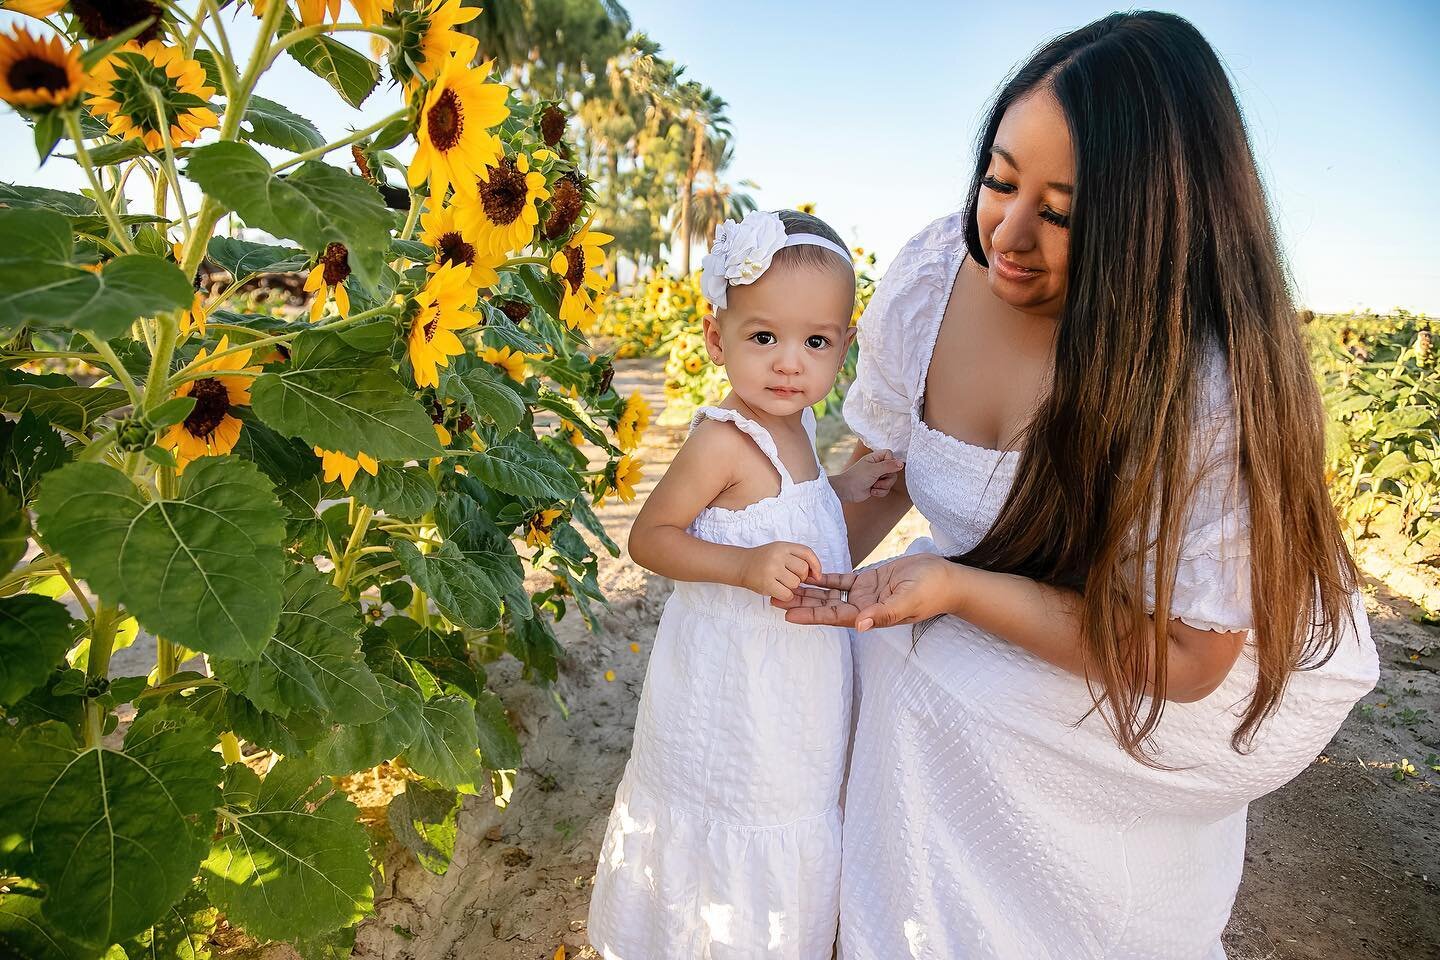 Lupita and her baby girl at @rocker7farmpatch 🌻🌻🌻